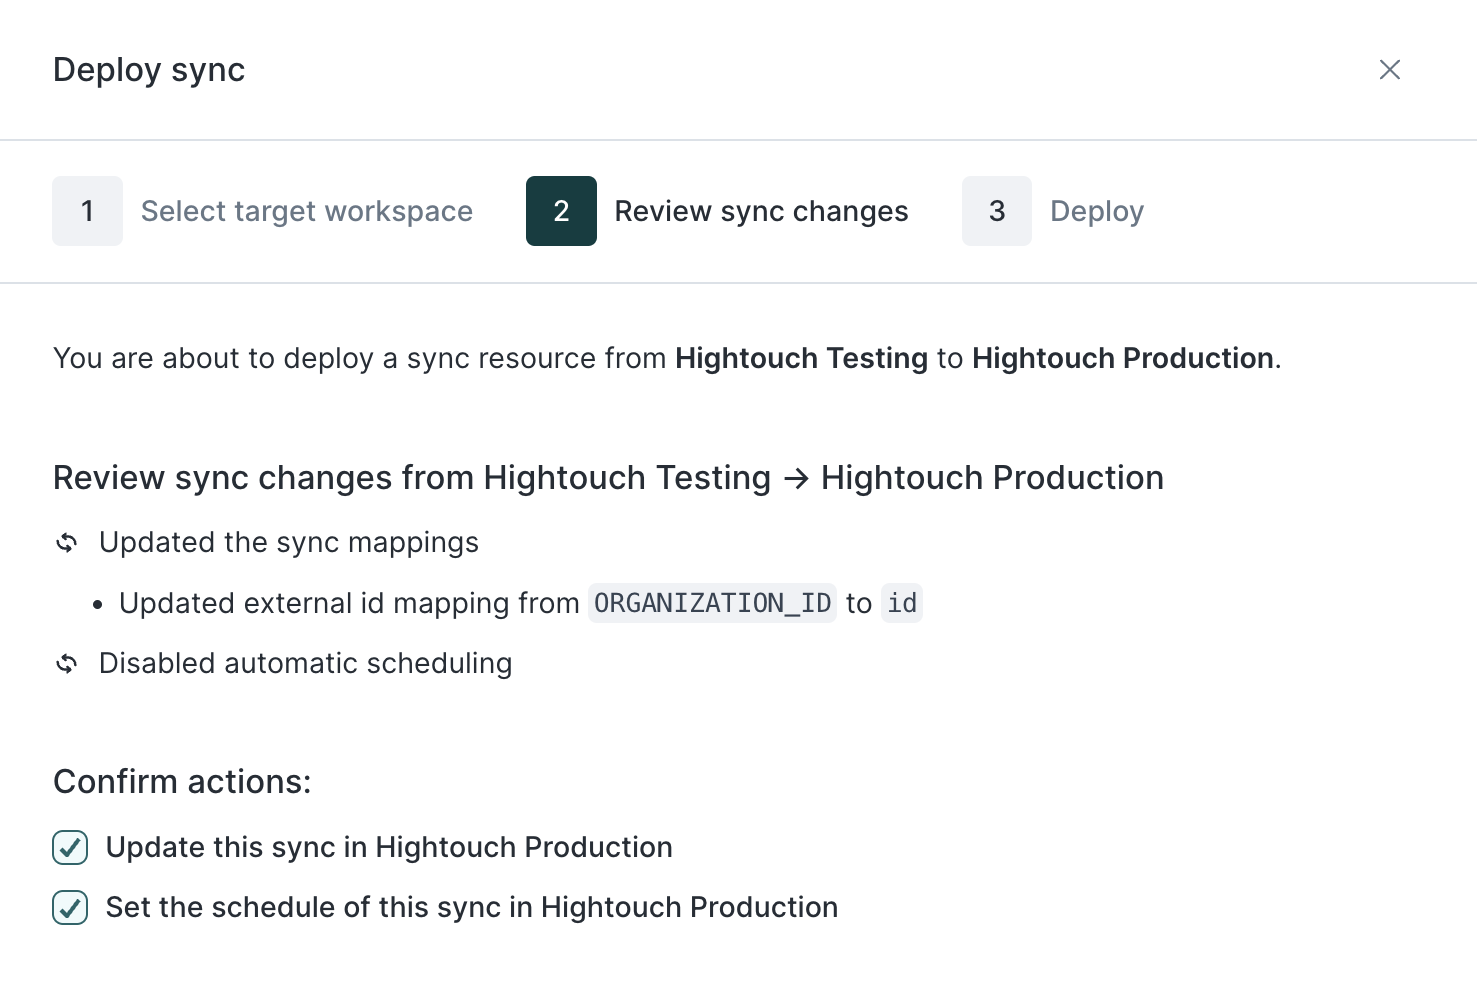 Deploying changes in the Hightouch UI